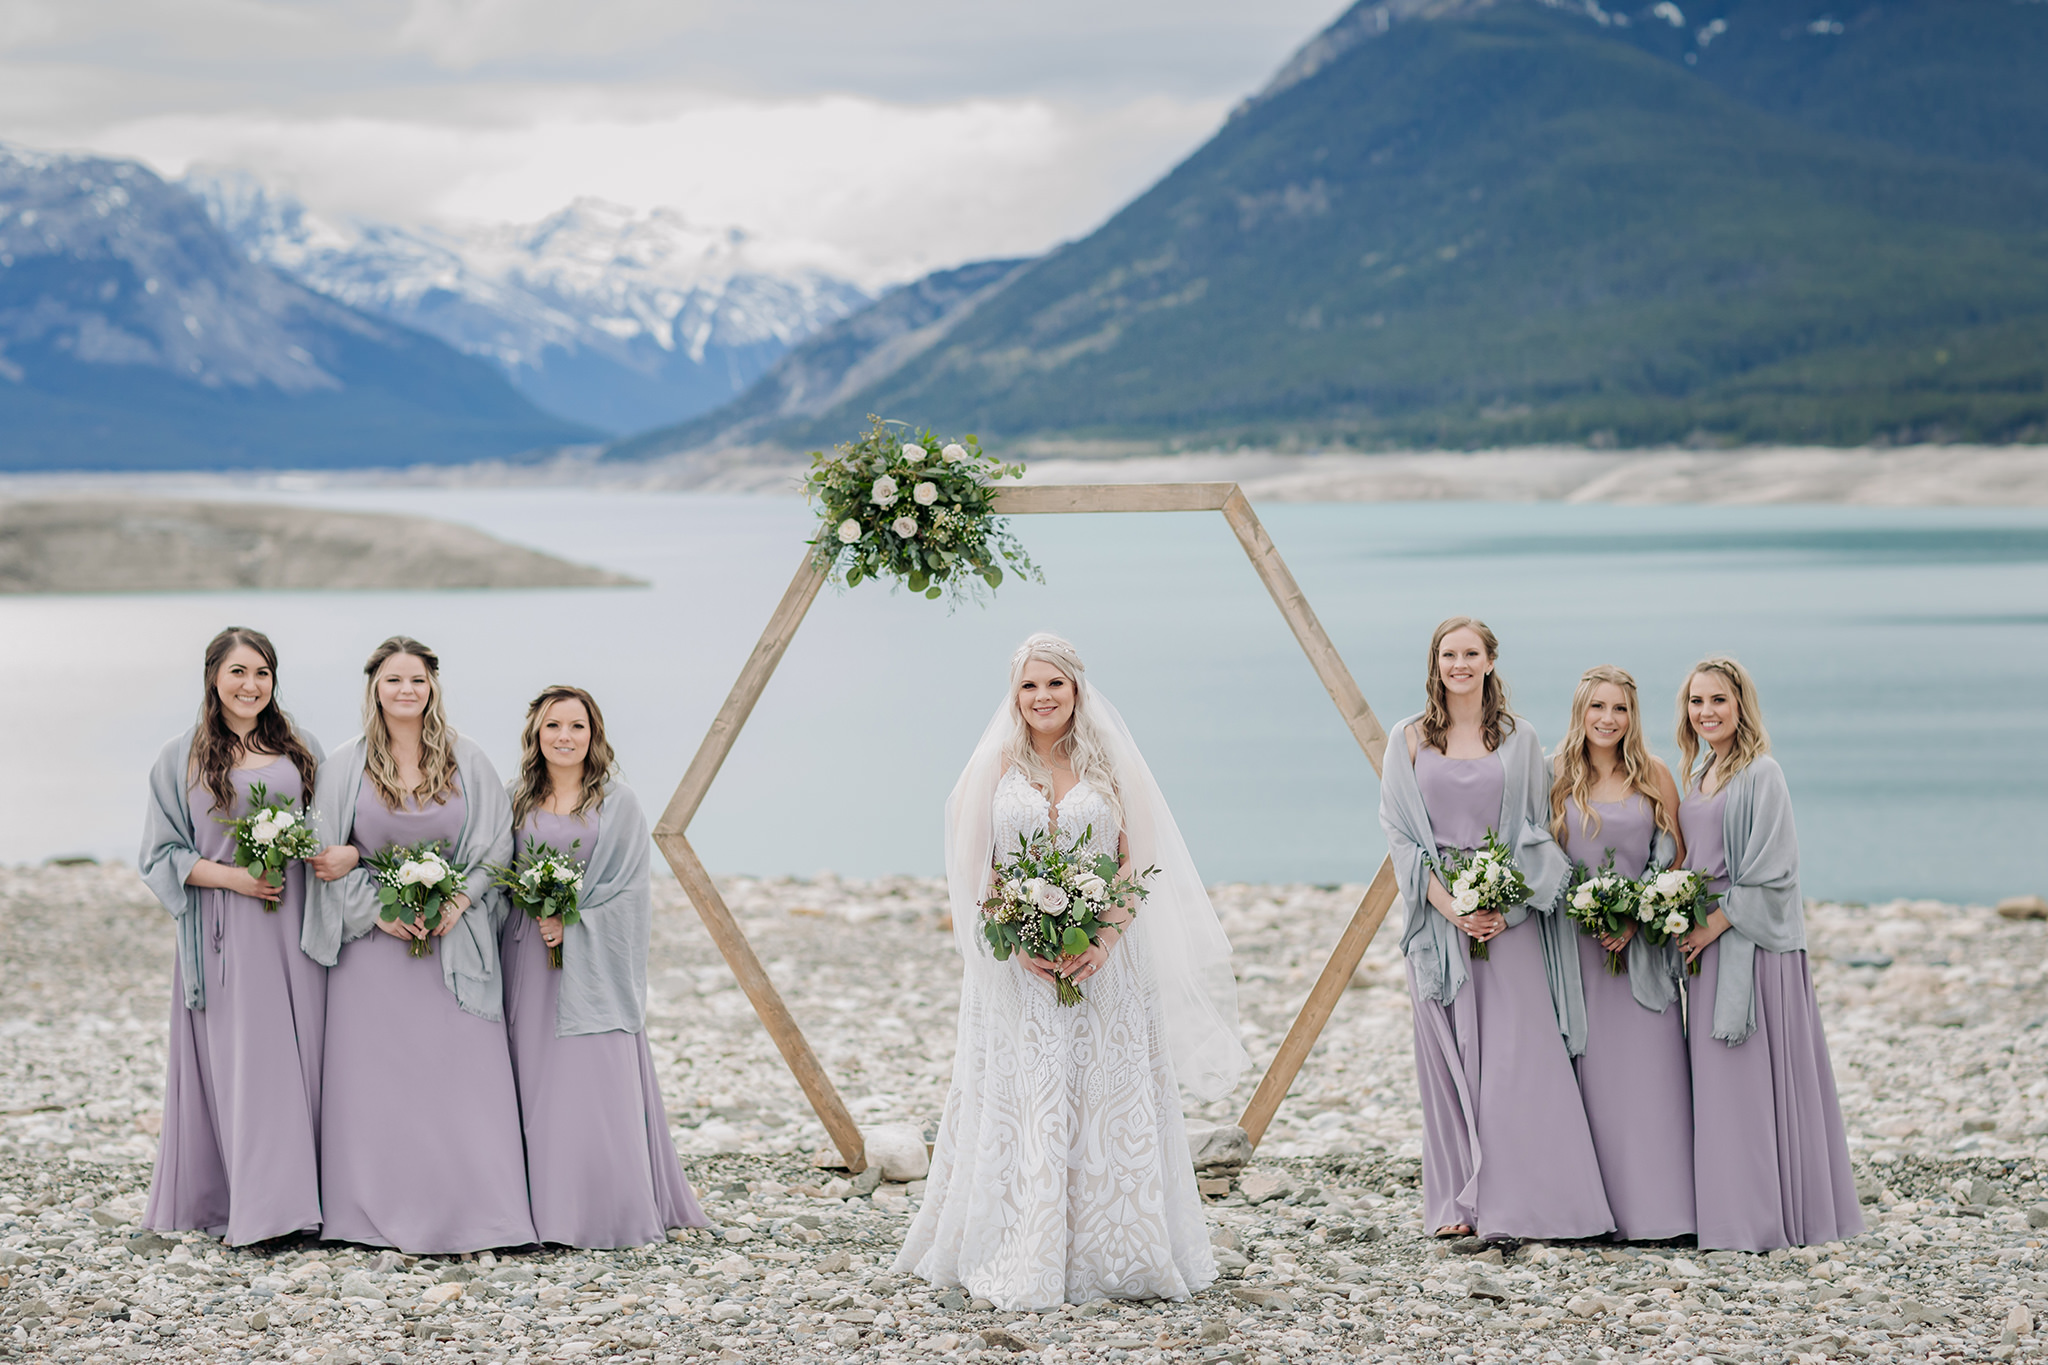 Abraham Lake Spring Mountain wedding with outdoor wedding portraits blue waters & mountains in the distance bridal party portraits